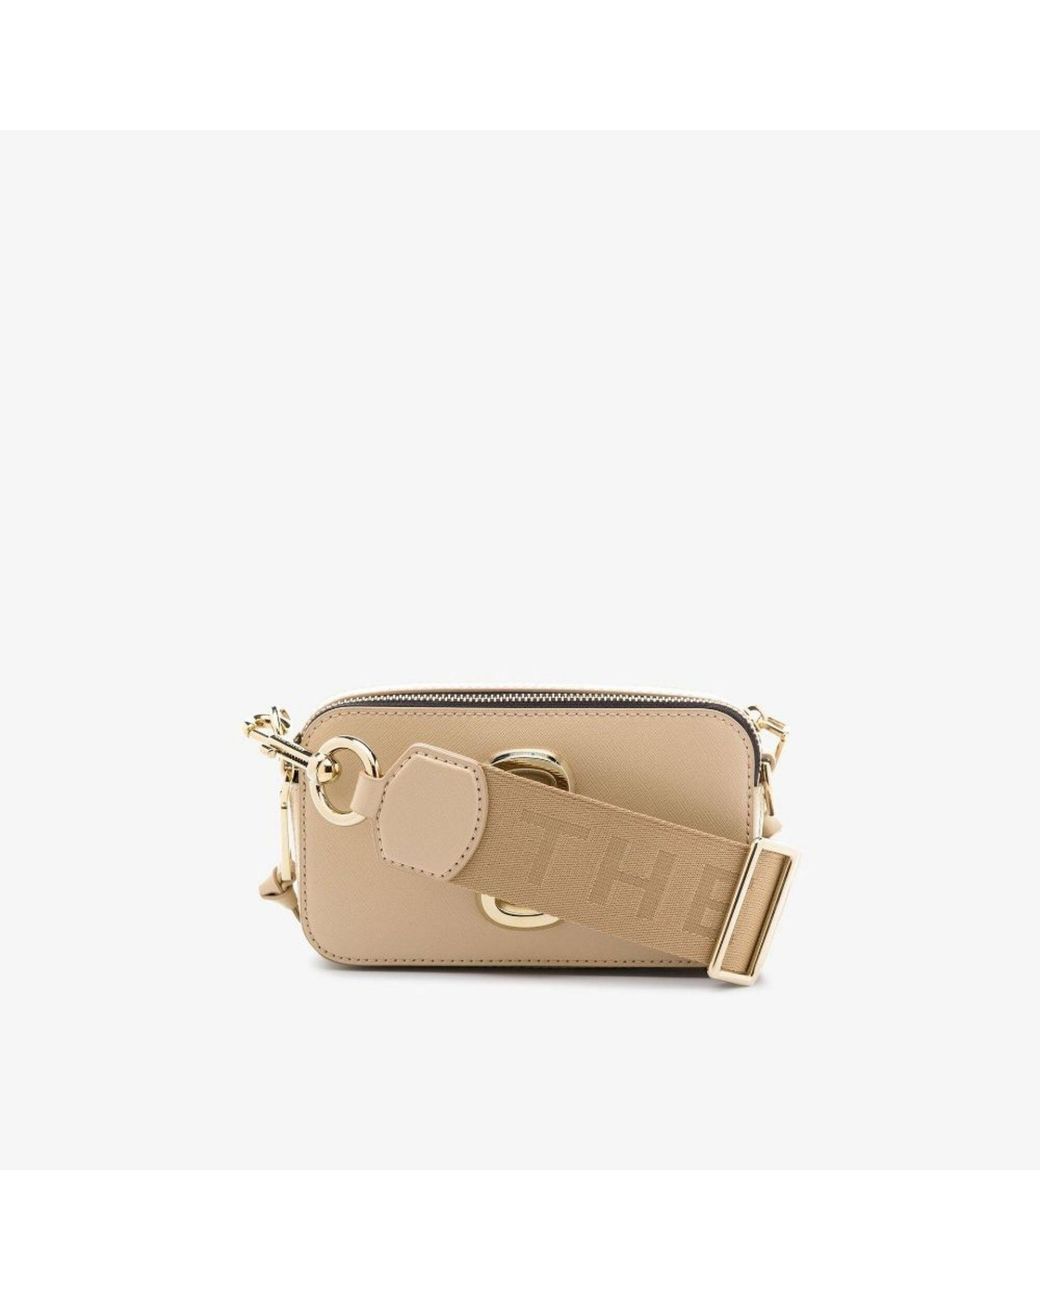 Marc Jacobs Neutral Snapshot Leather Cross Body Bag in Natural | Lyst